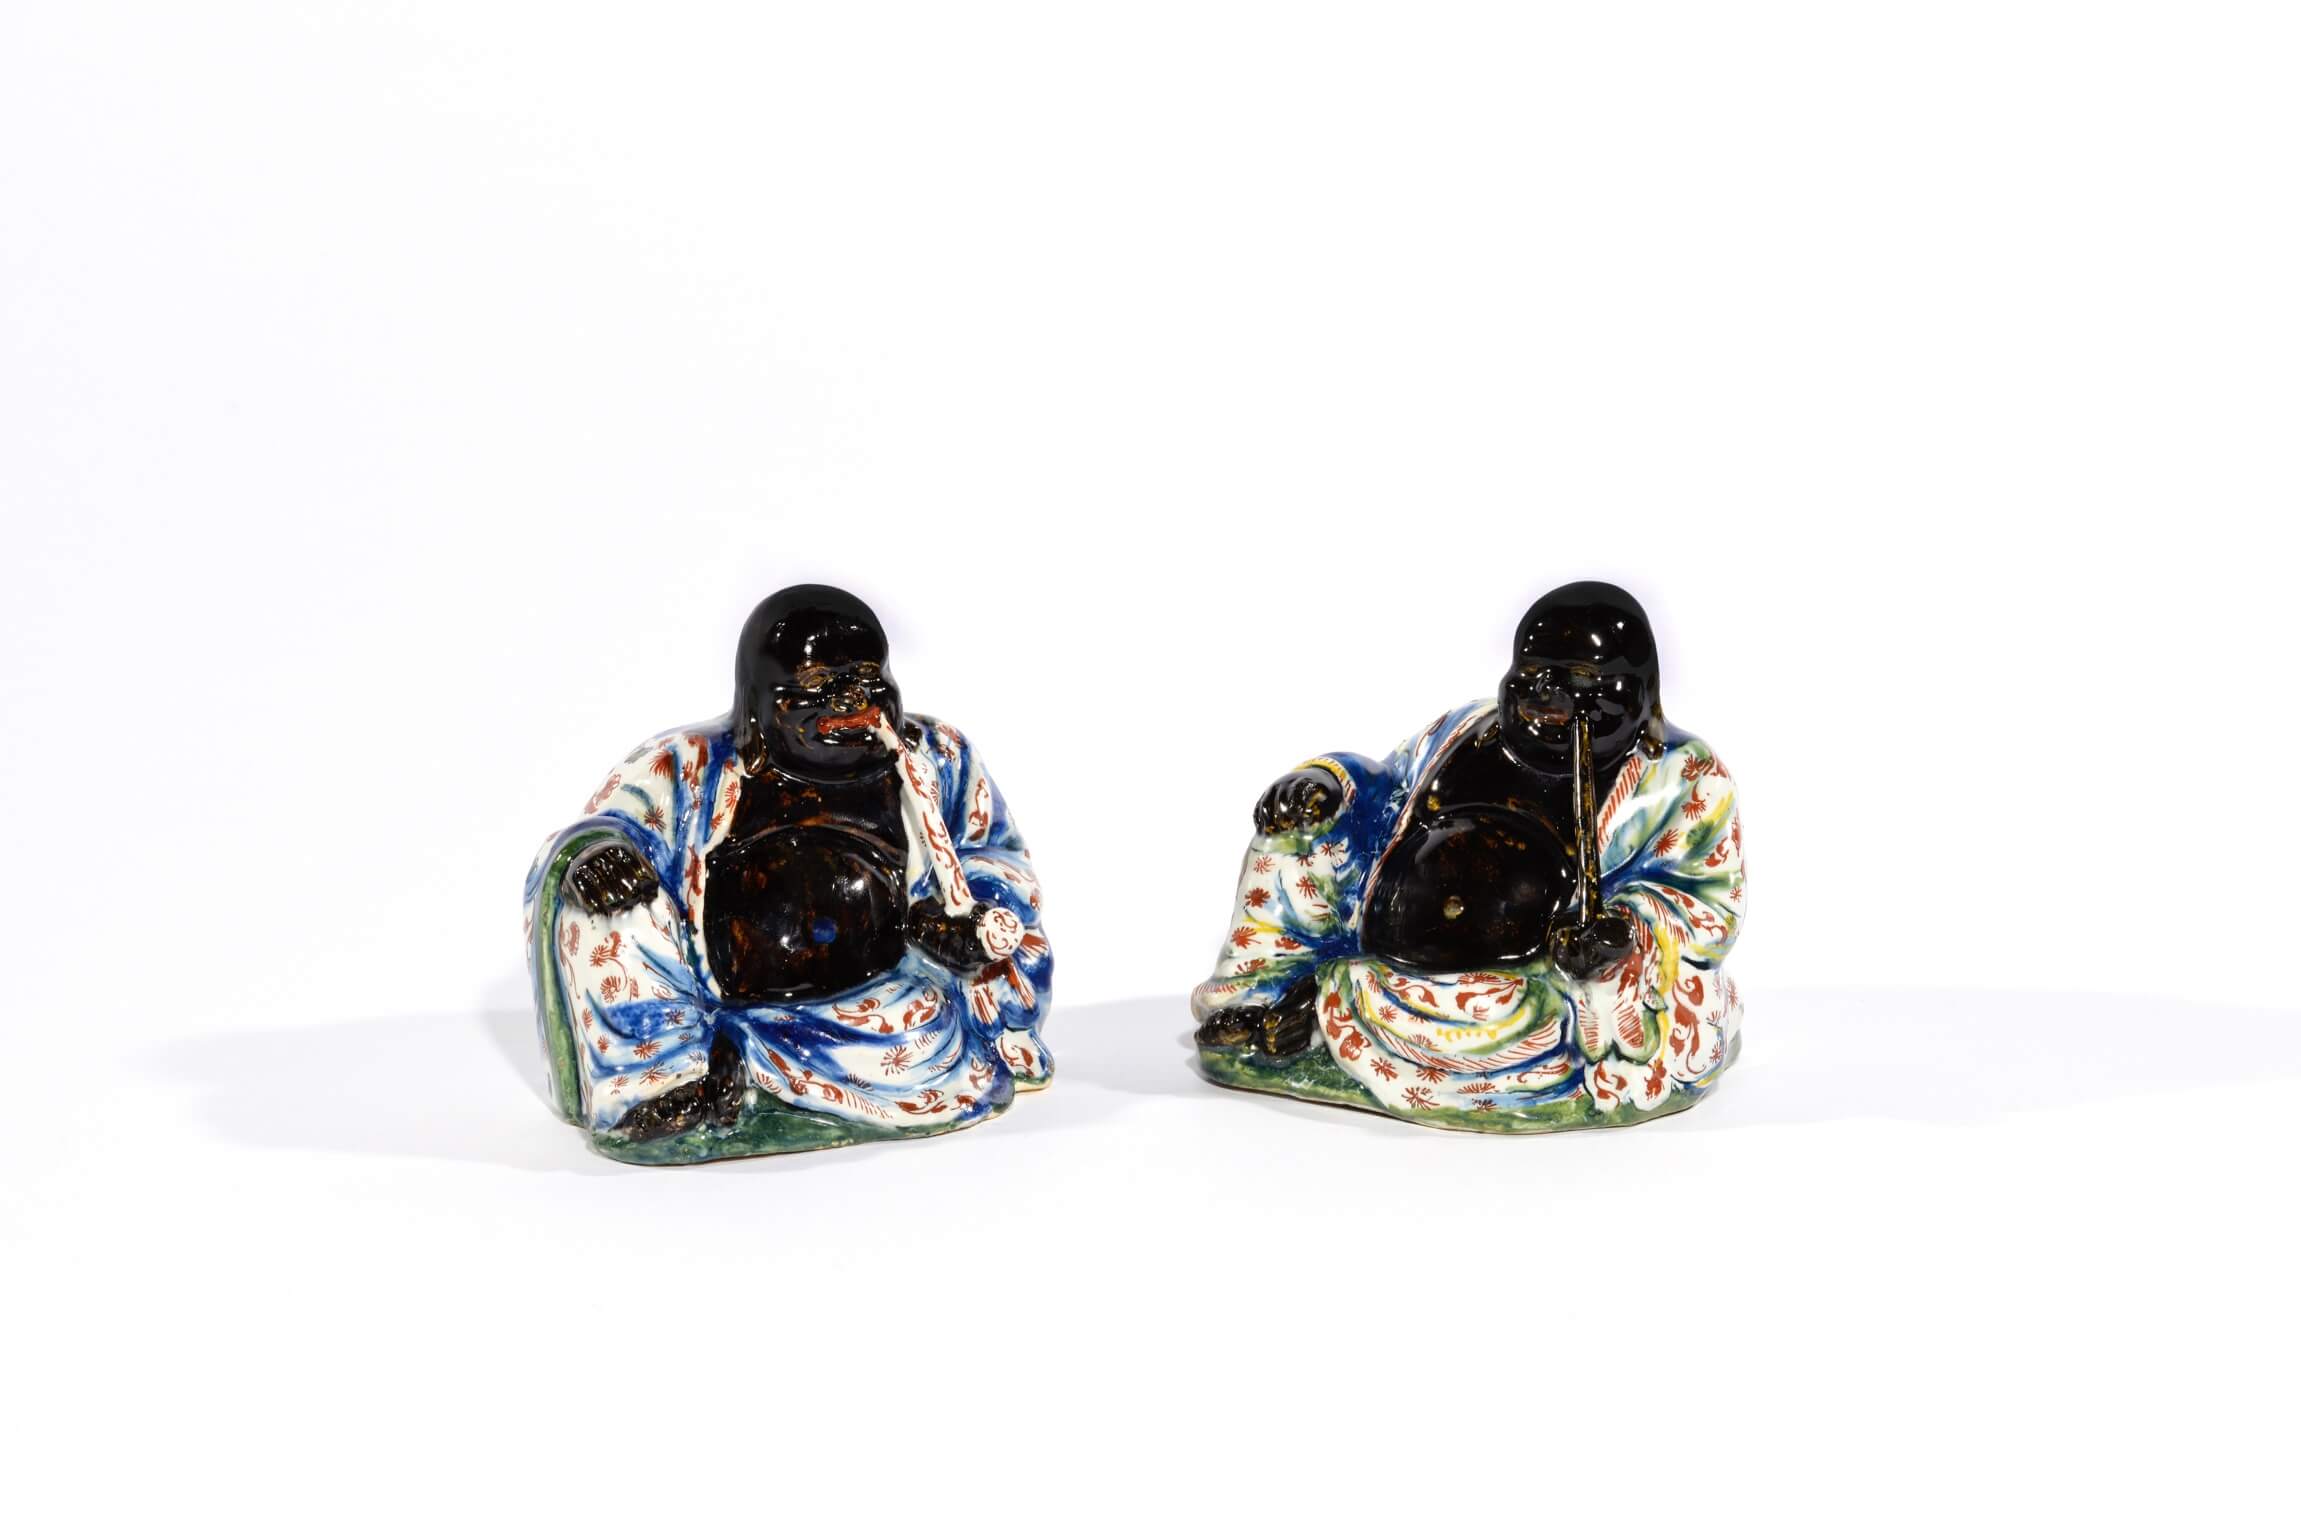 • D1615. Two ‘Black Delft’ Figures of Budai Heshang